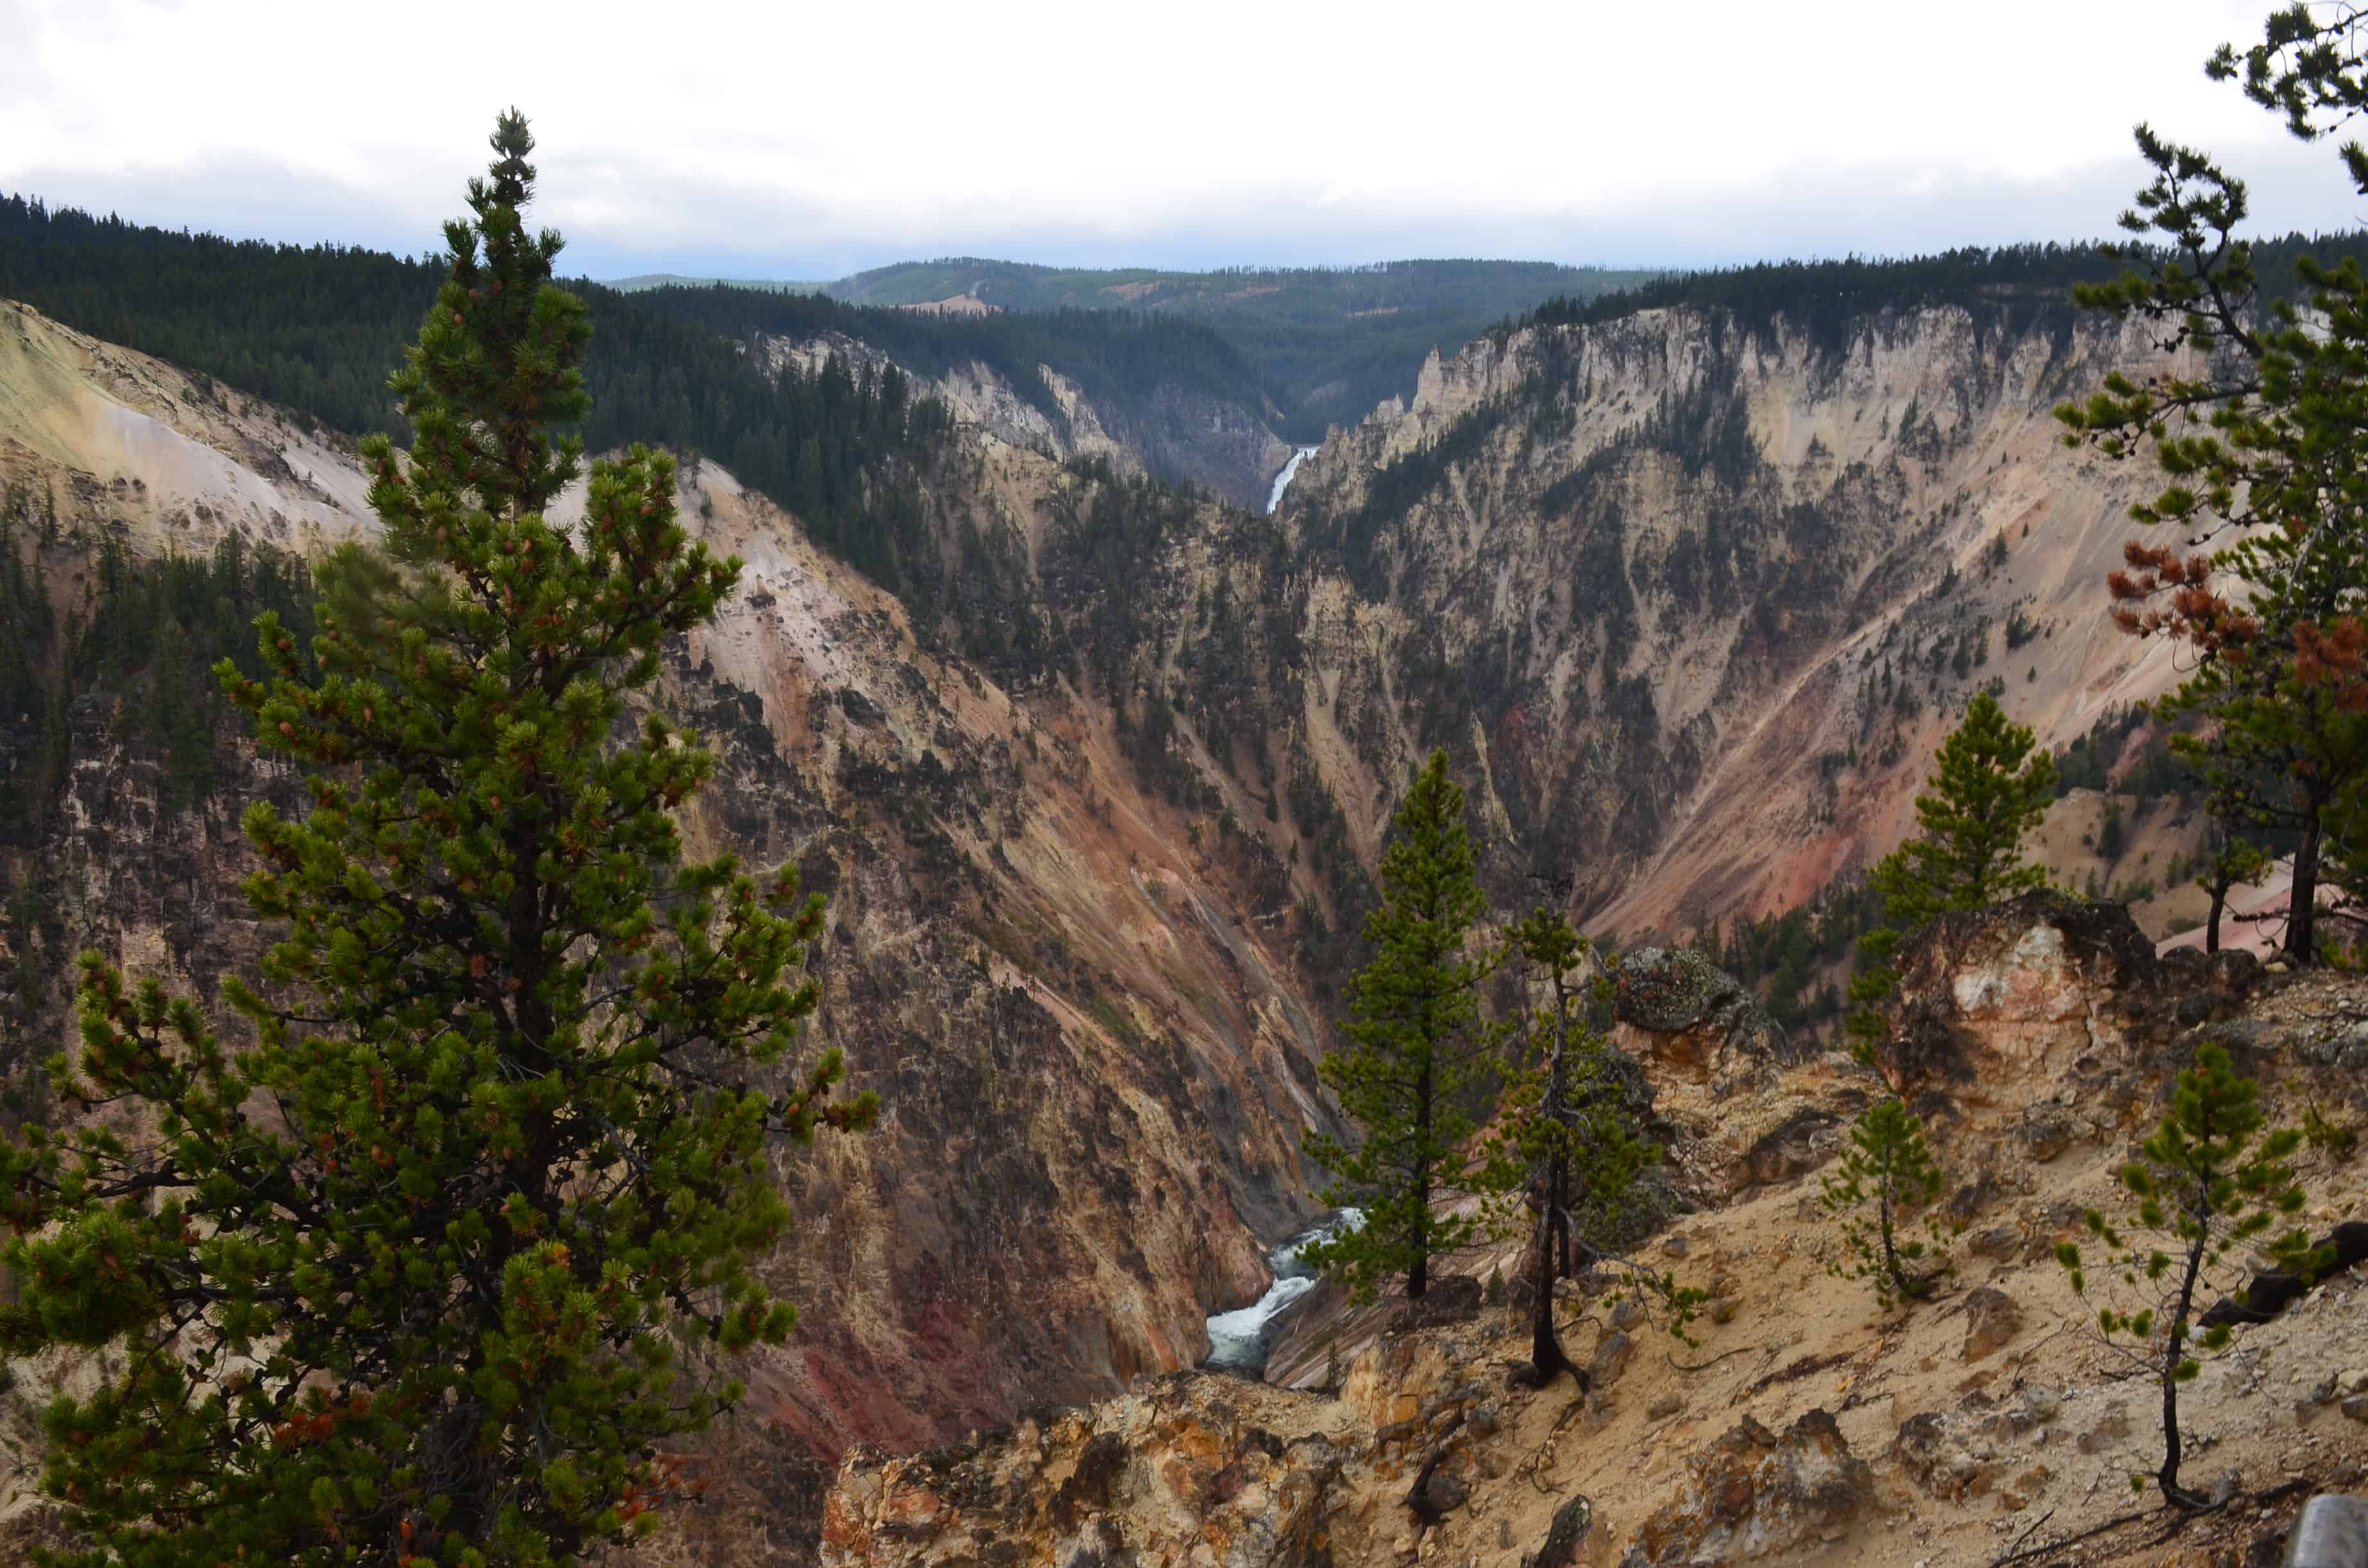 Inspiration Point at Grand Canyon of the Yellowstone in Yellowstone National Park, Wyoming